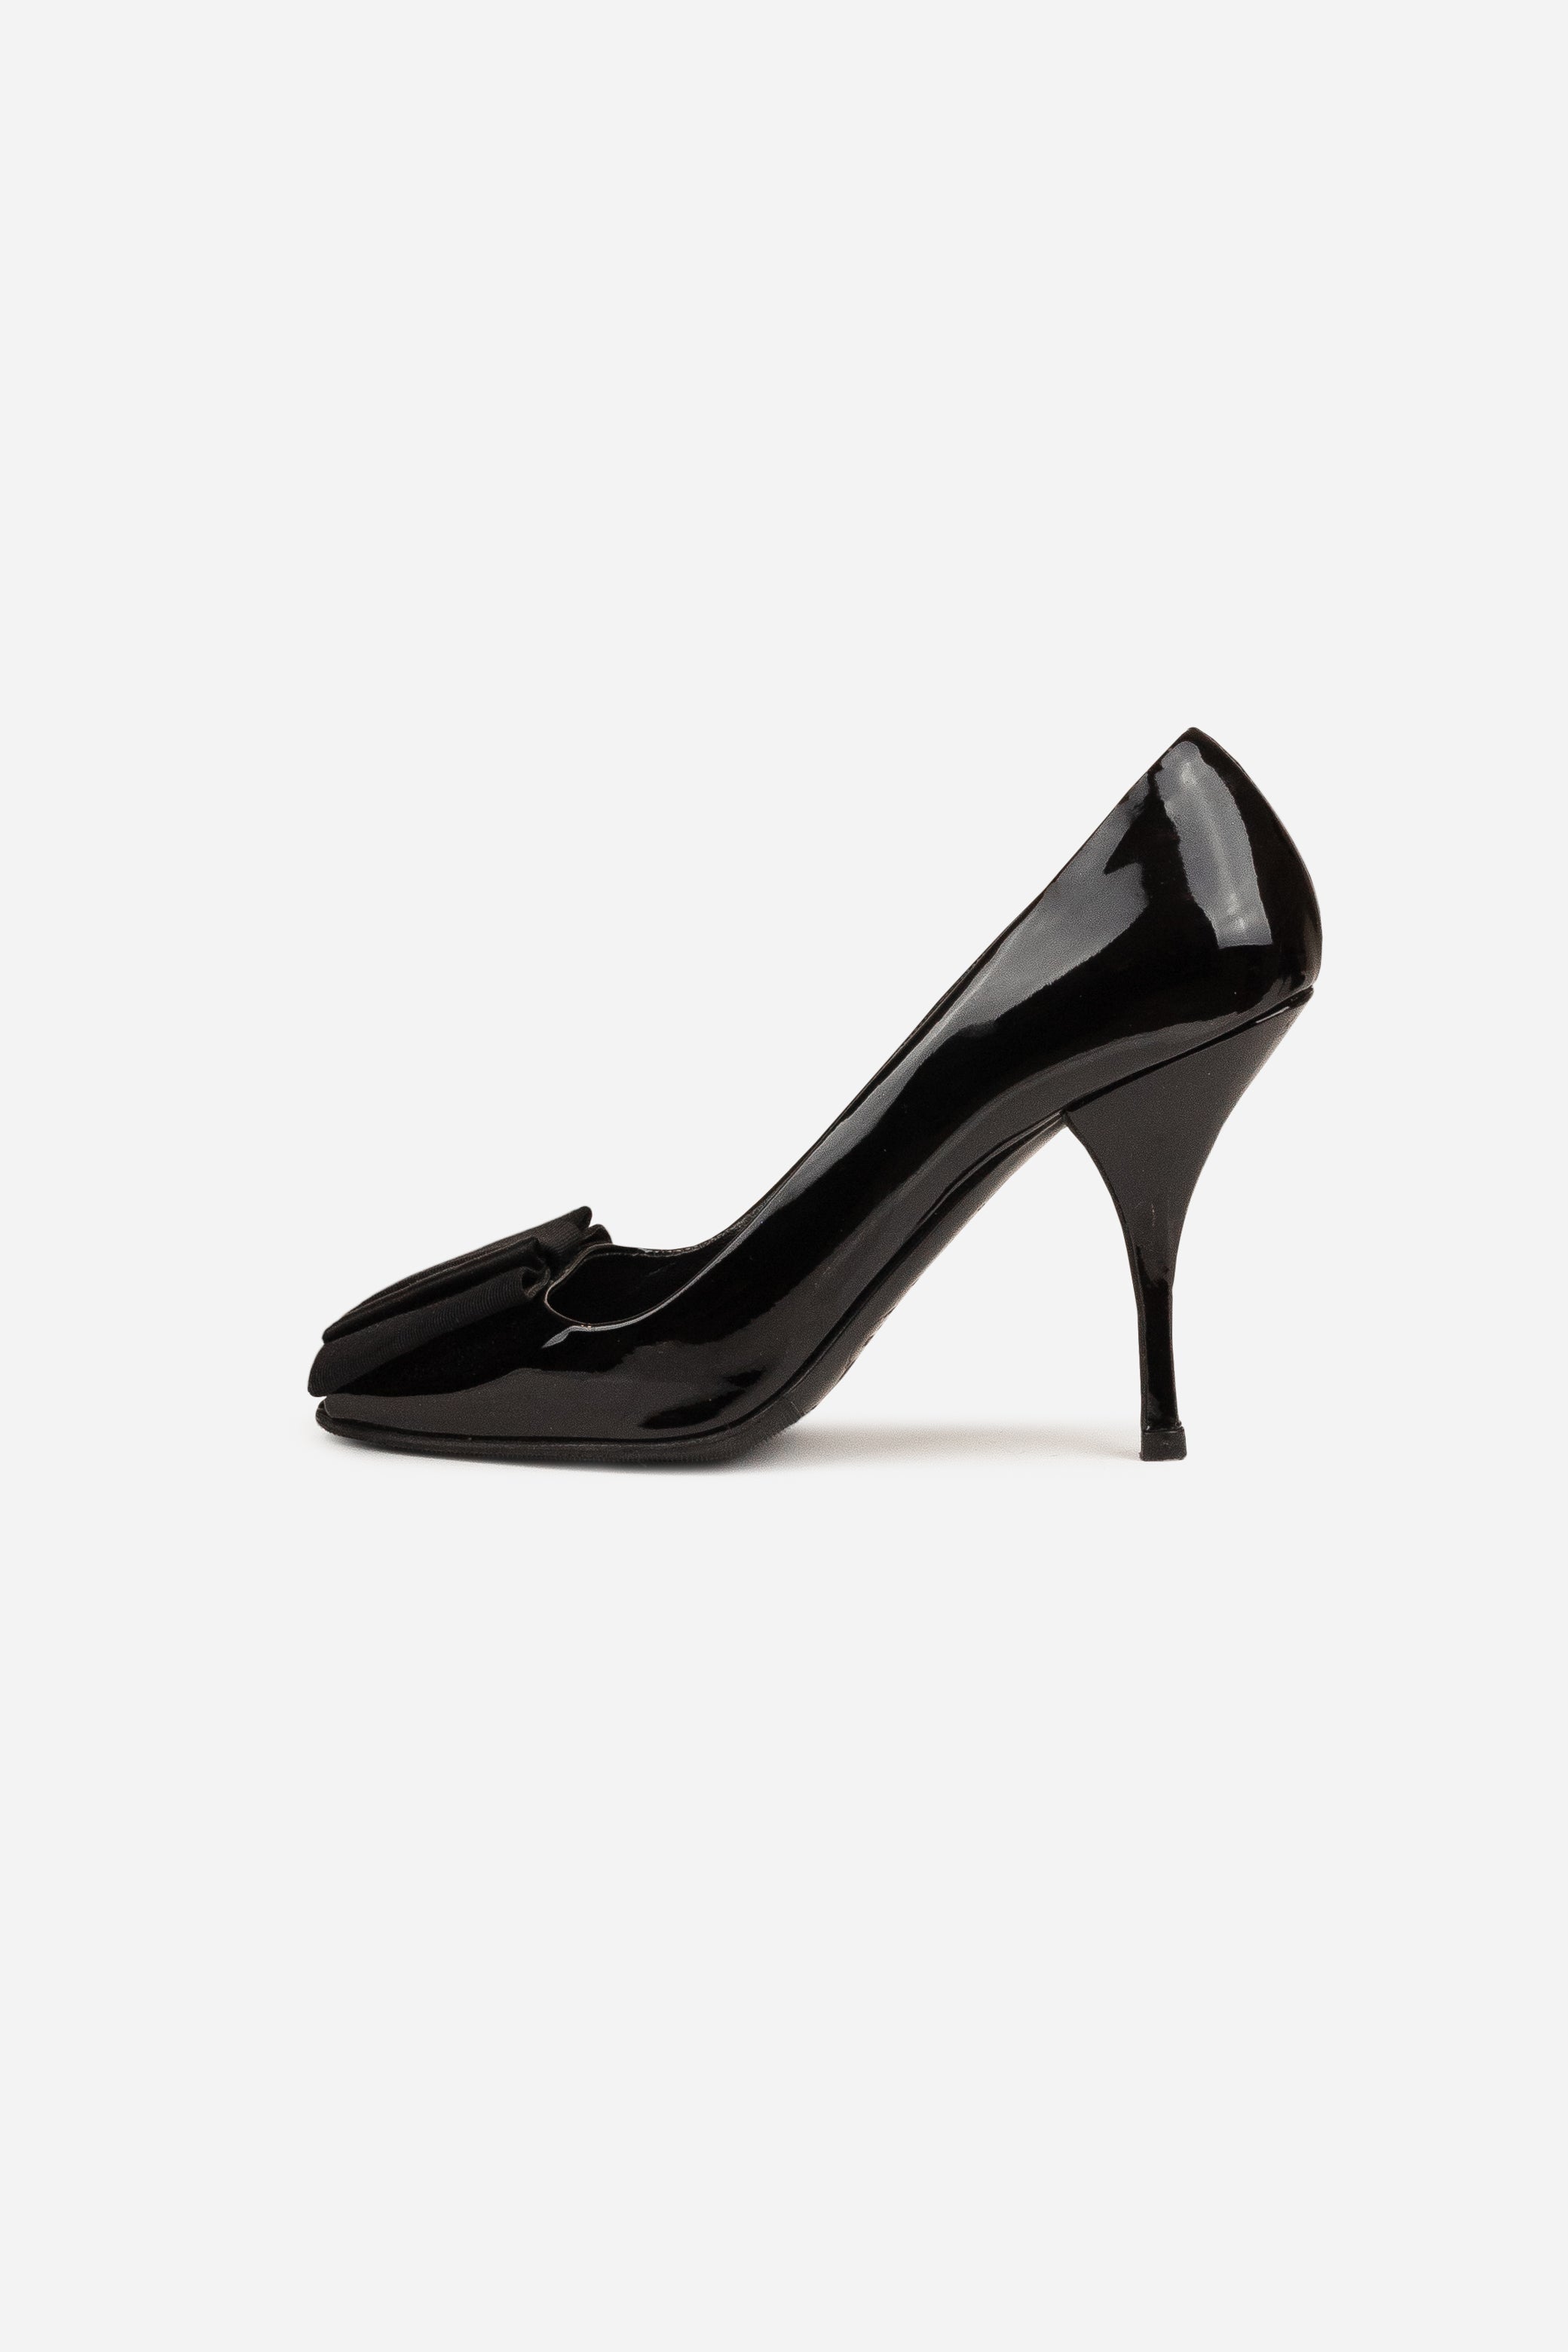 Black Patent Leather Bow Detailed Pumps